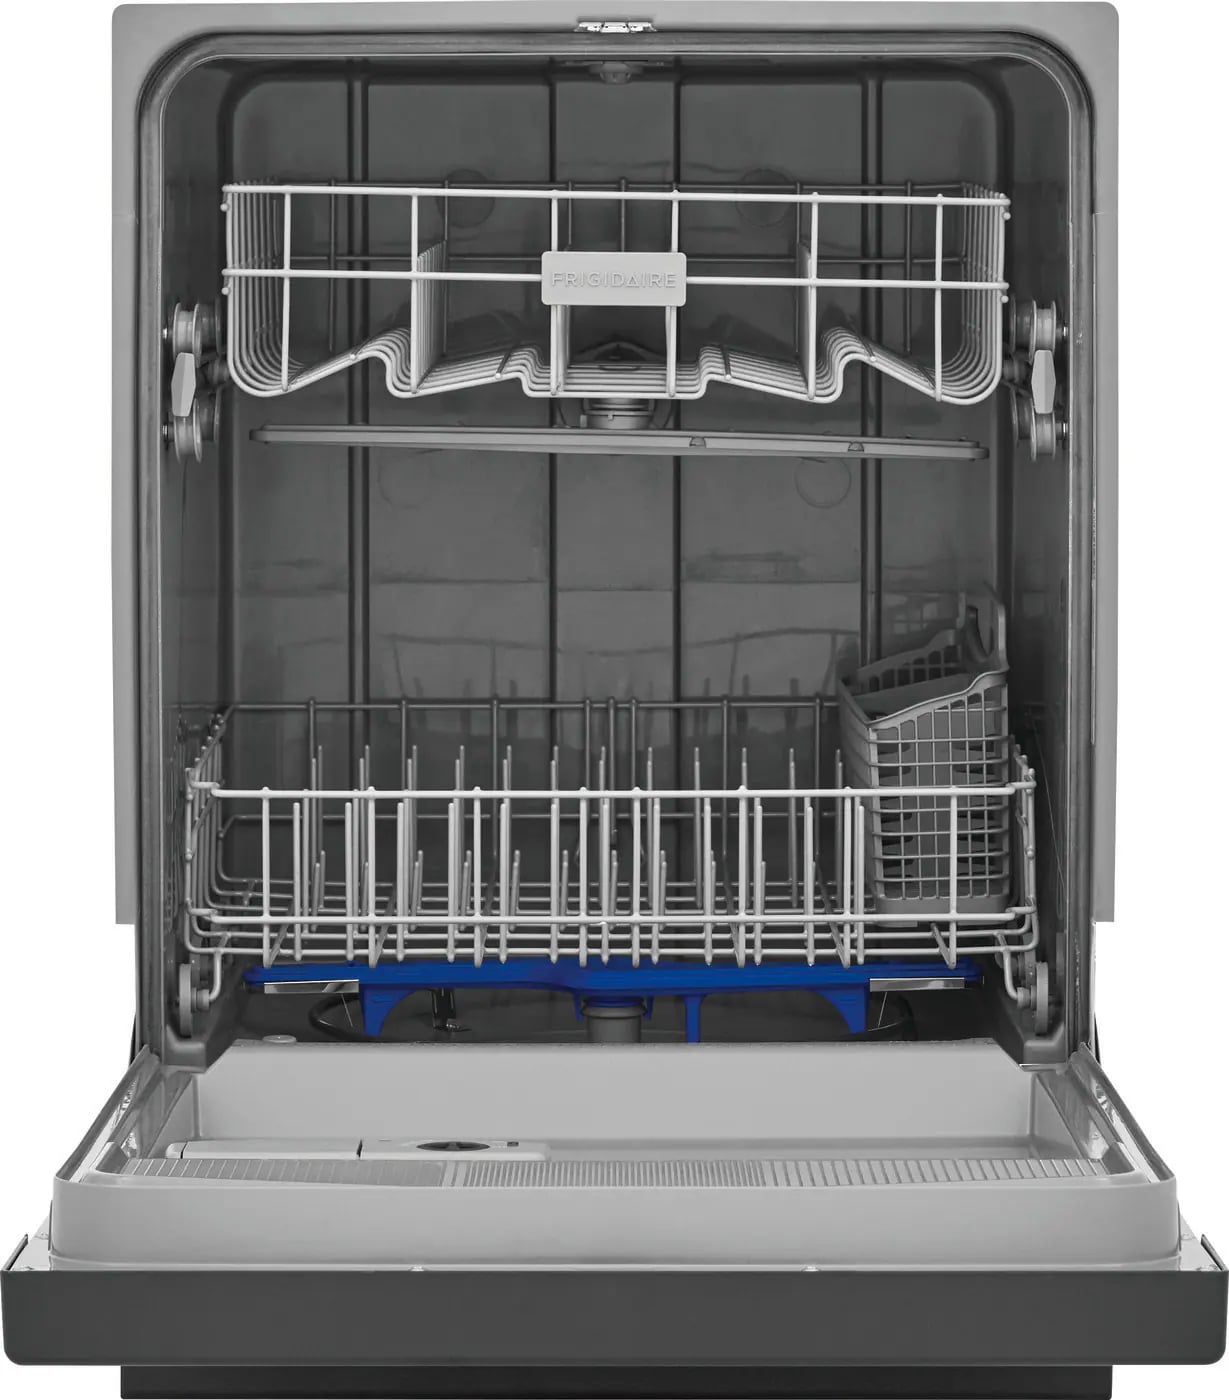 Frigidaire - 62 dBA Built In Dishwasher in Stainless - FDPC4221AS